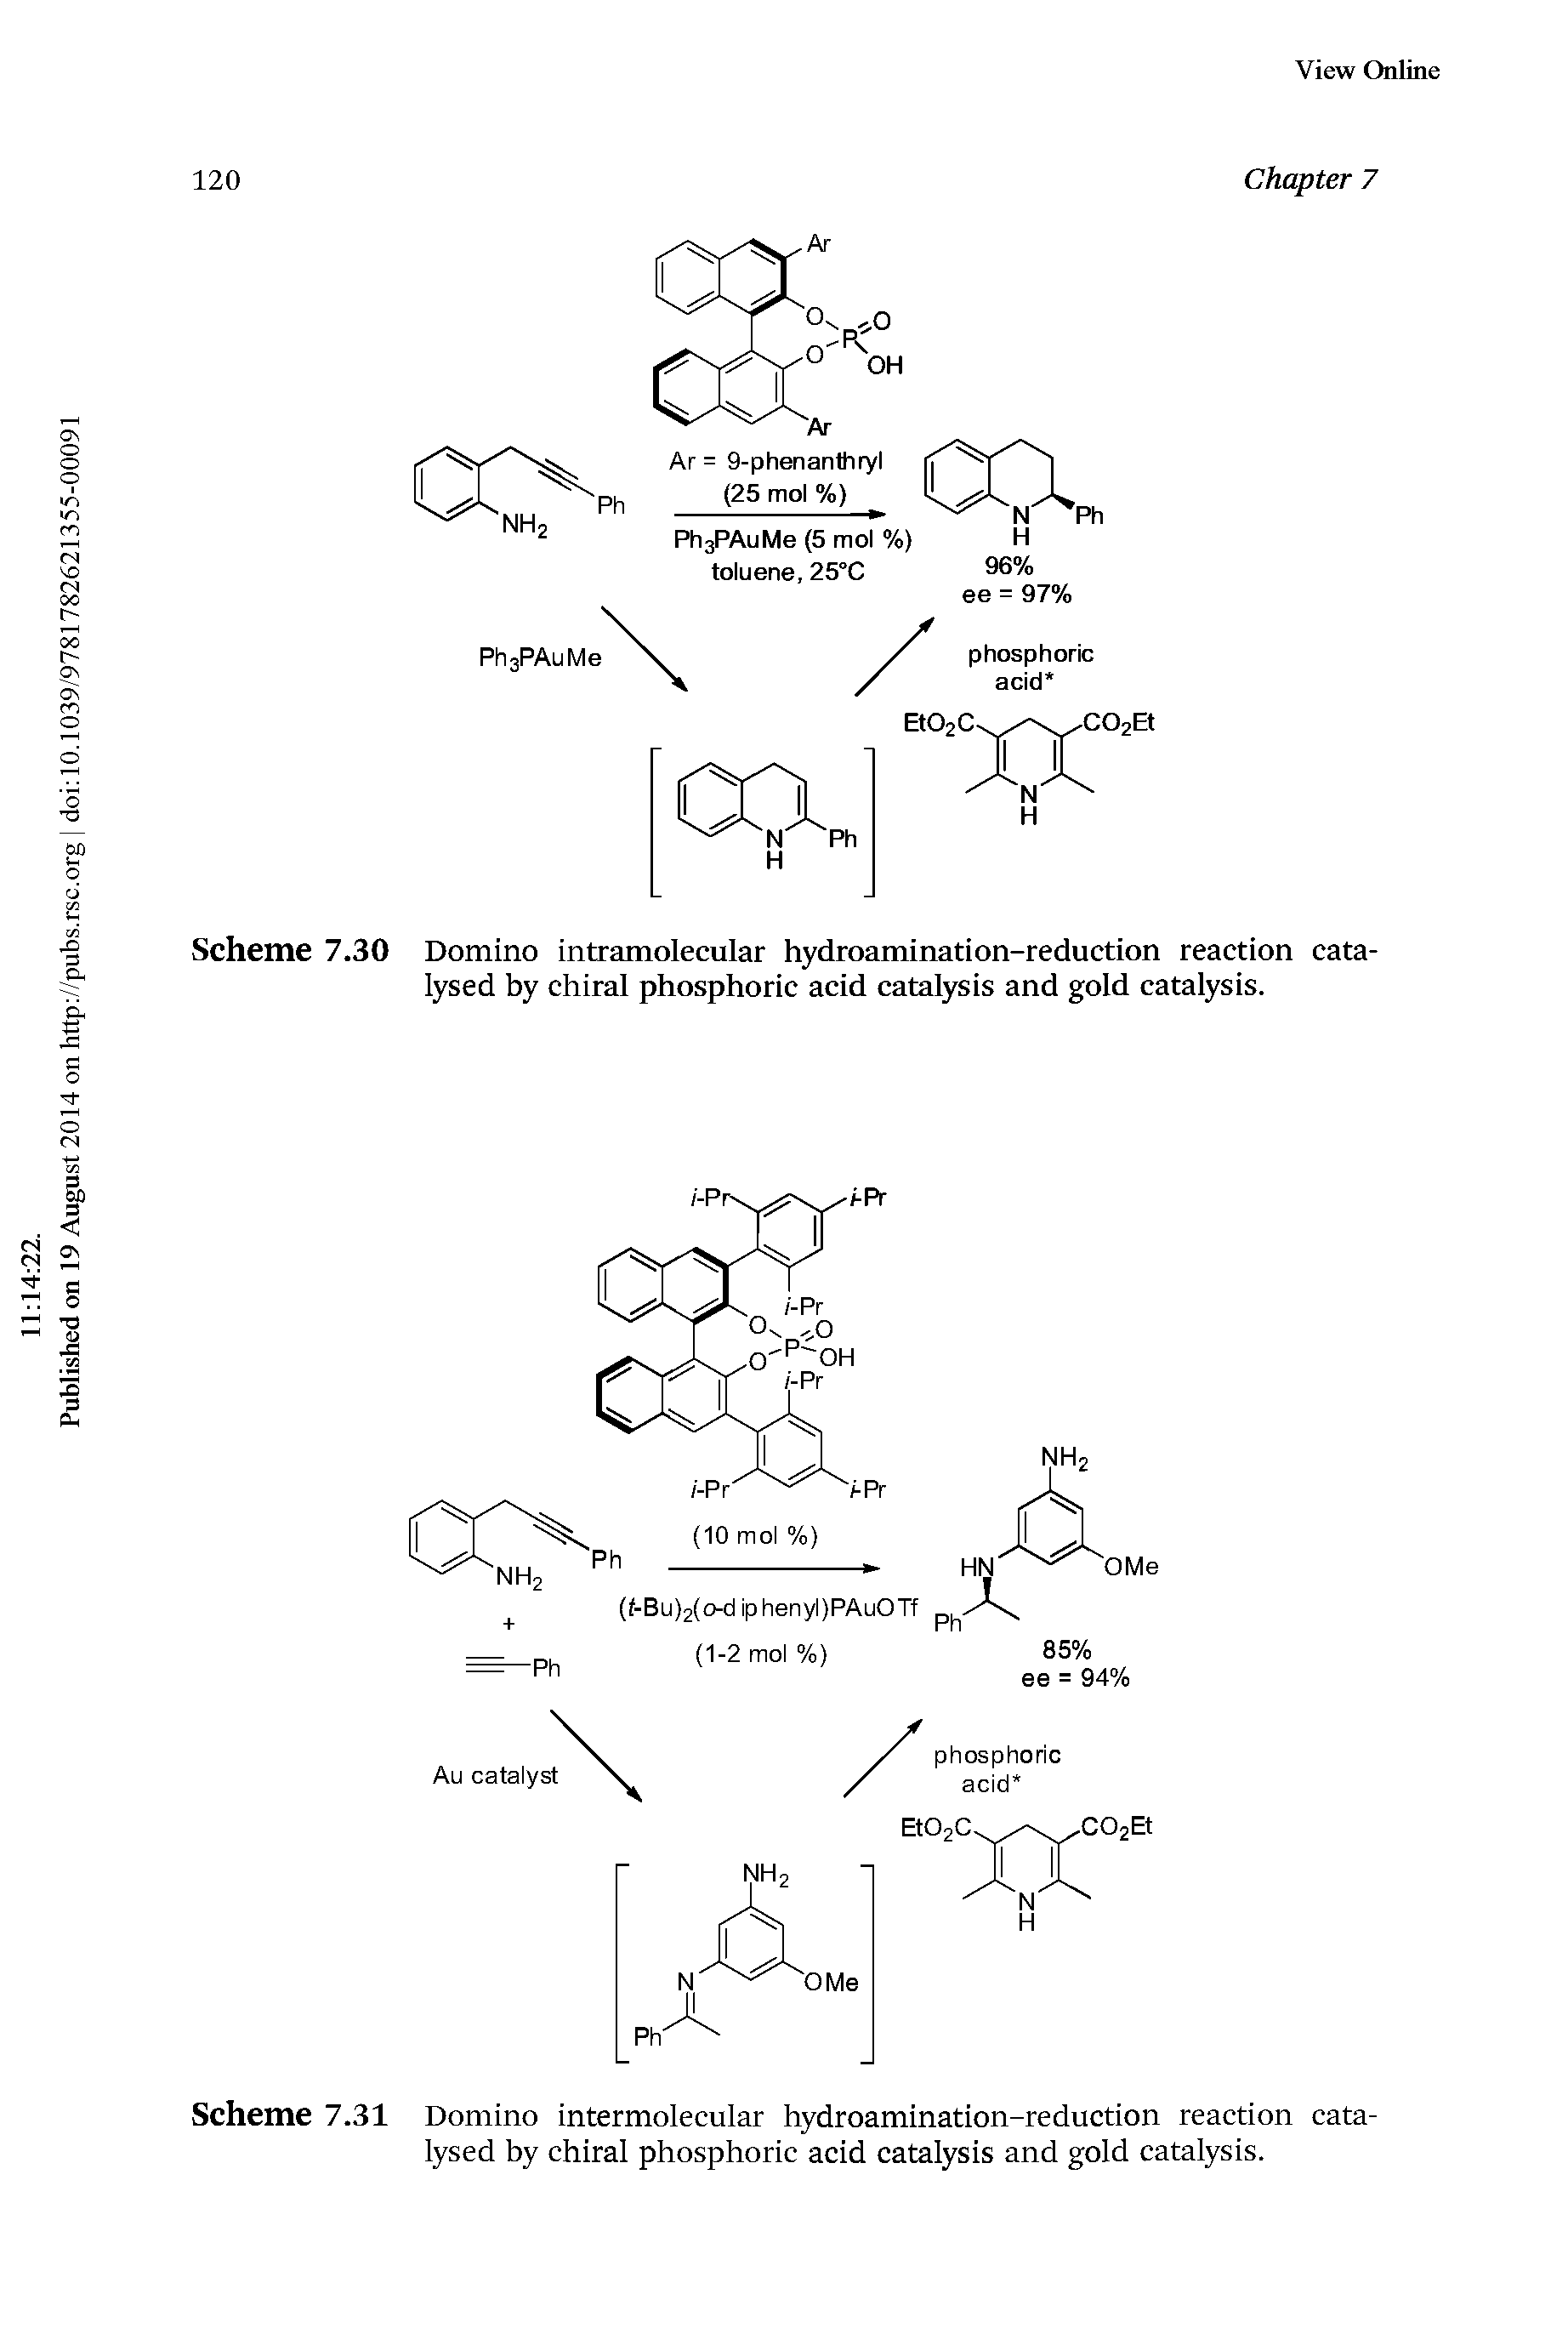 Scheme 7.30 Domino intramolecular hydroamination-reduction reaction catalysed by chiral phosphoric acid catalysis and gold catalysis.